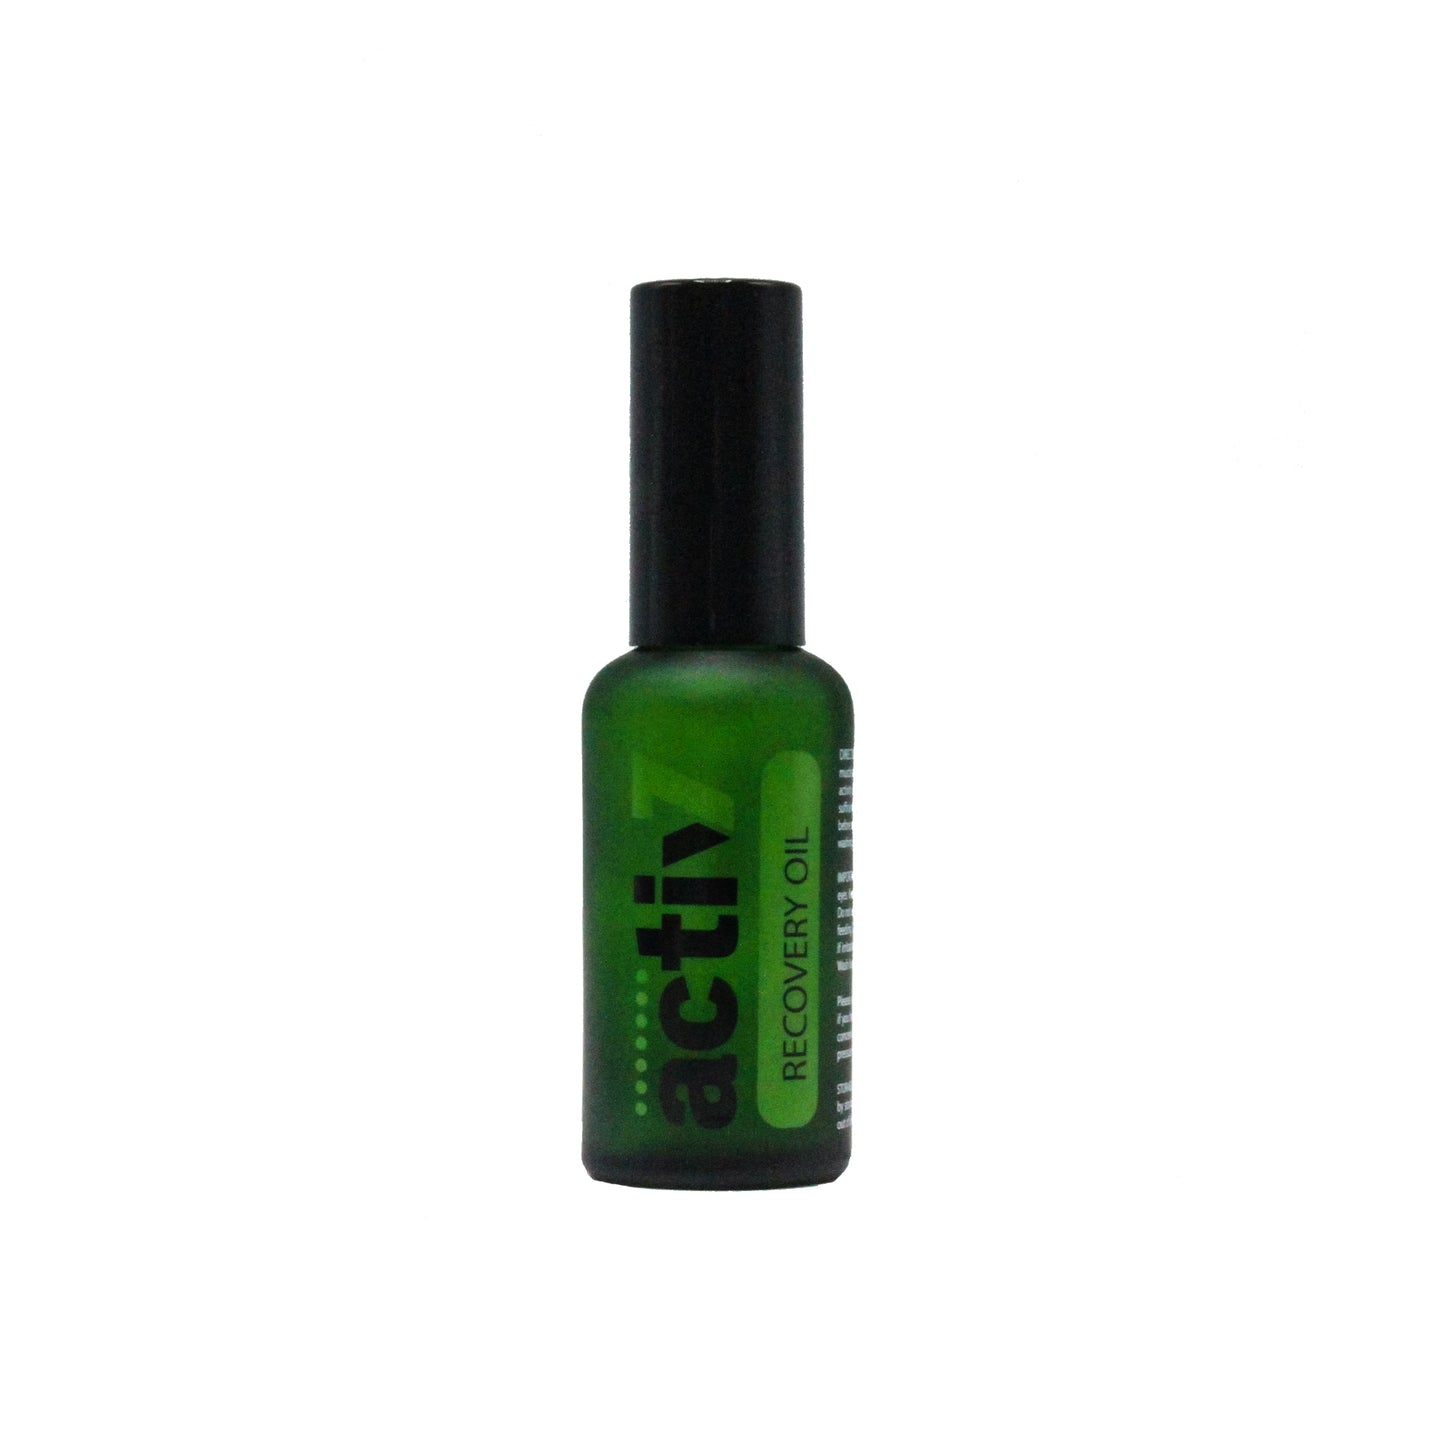 Activ7 Recovery Oil 50ml